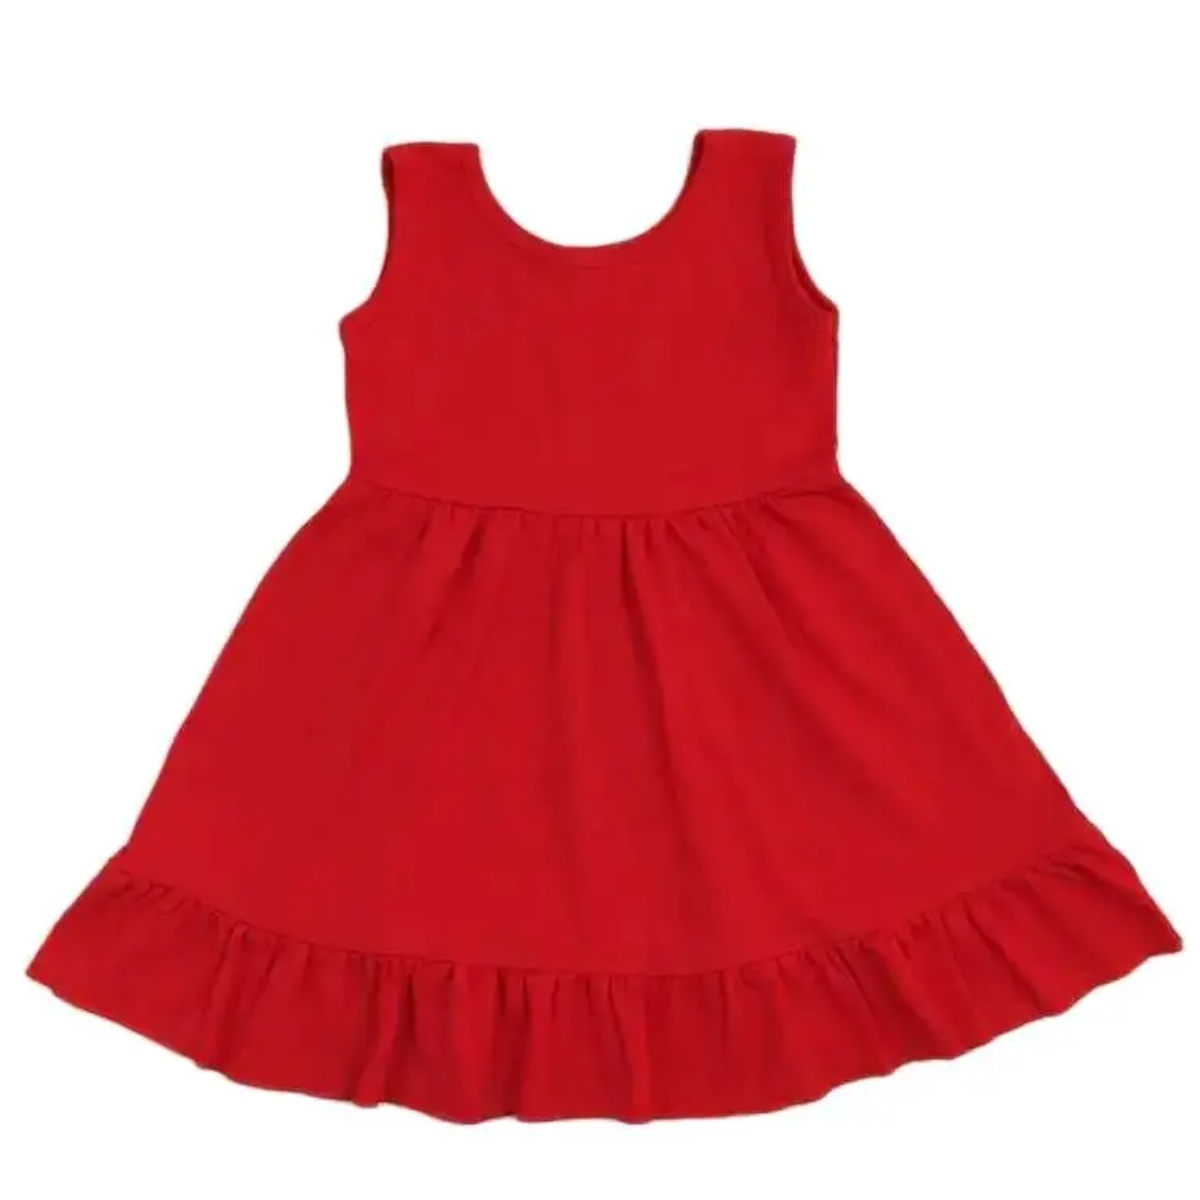 Girls Solid Red Twirly Dress - Summer Sleeveless 4th of July